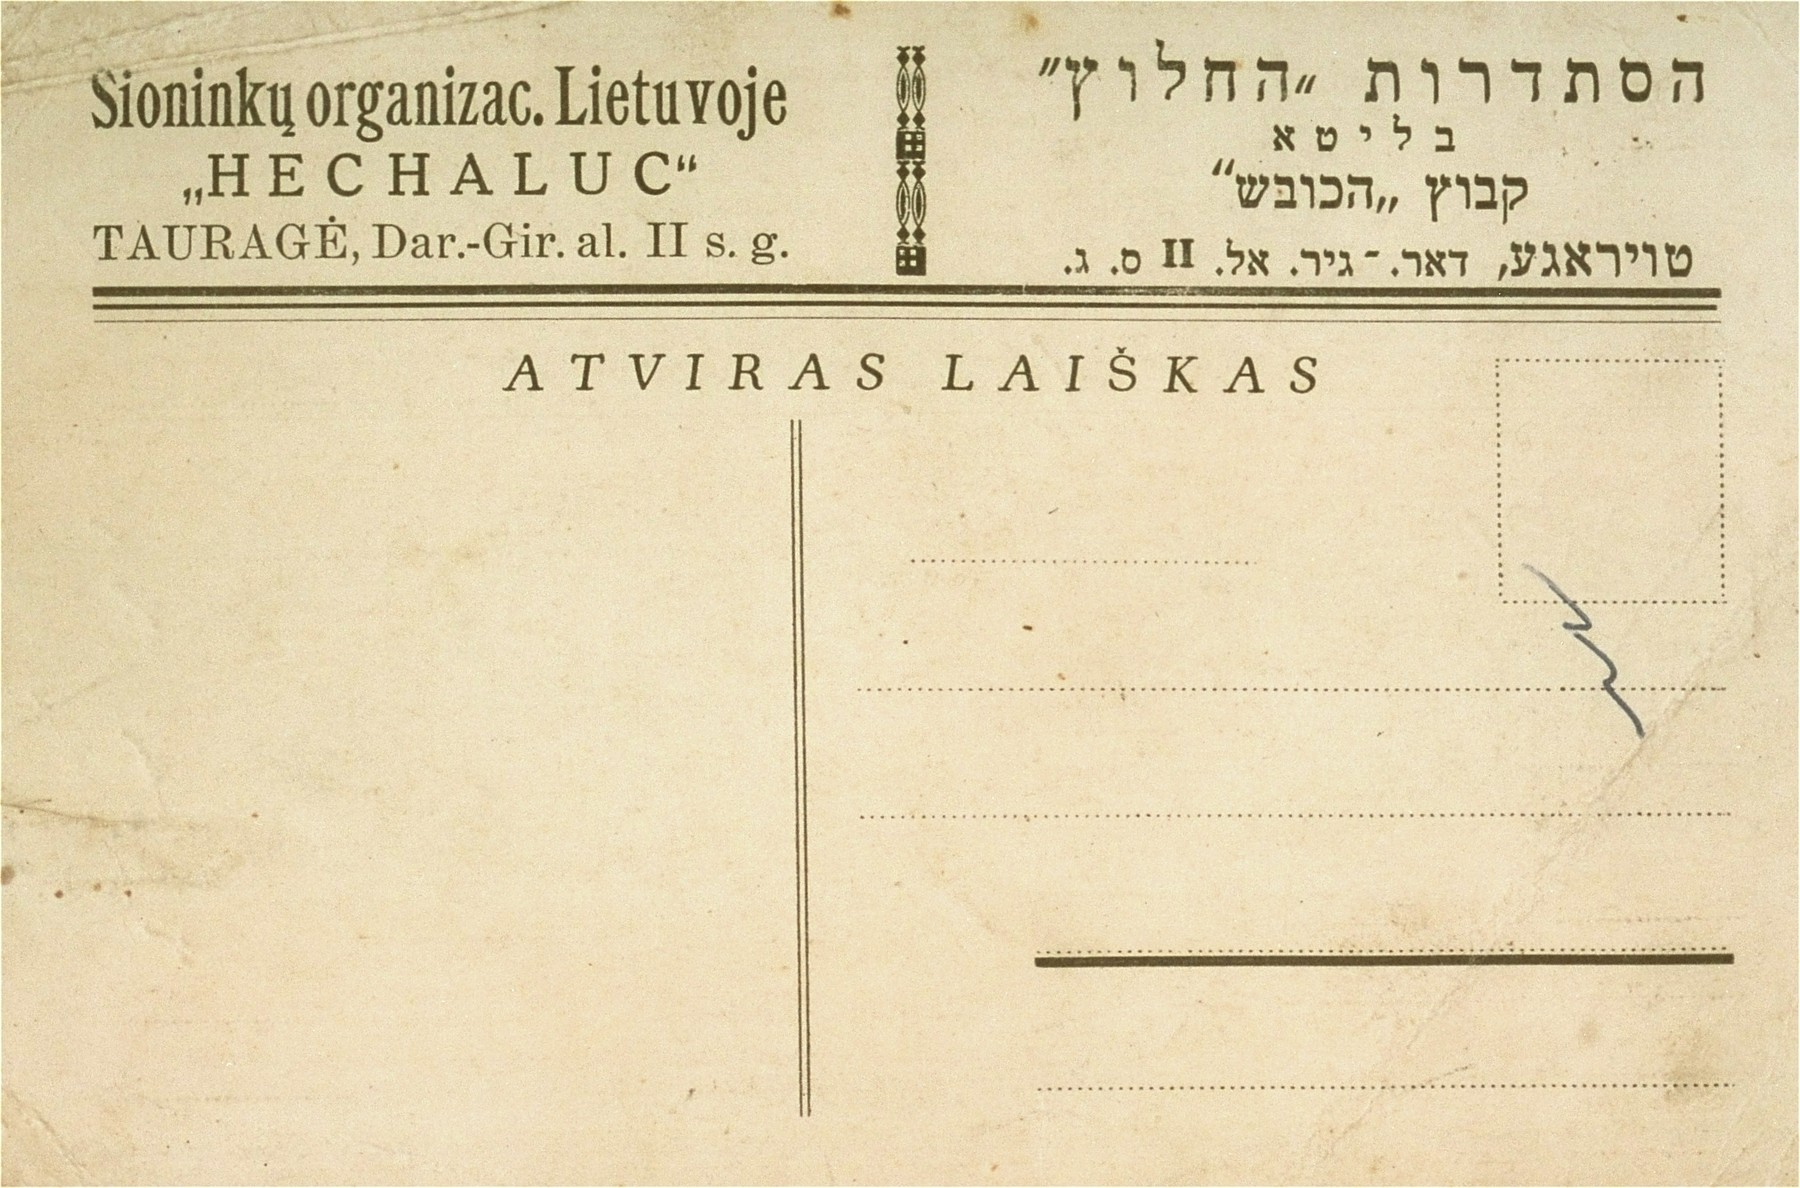 Blank postcard bearing the return address of the Kibbutz Hakovesh of the Zionist Hehalutz Organization of Lithuania in Taurage, Lithuania.